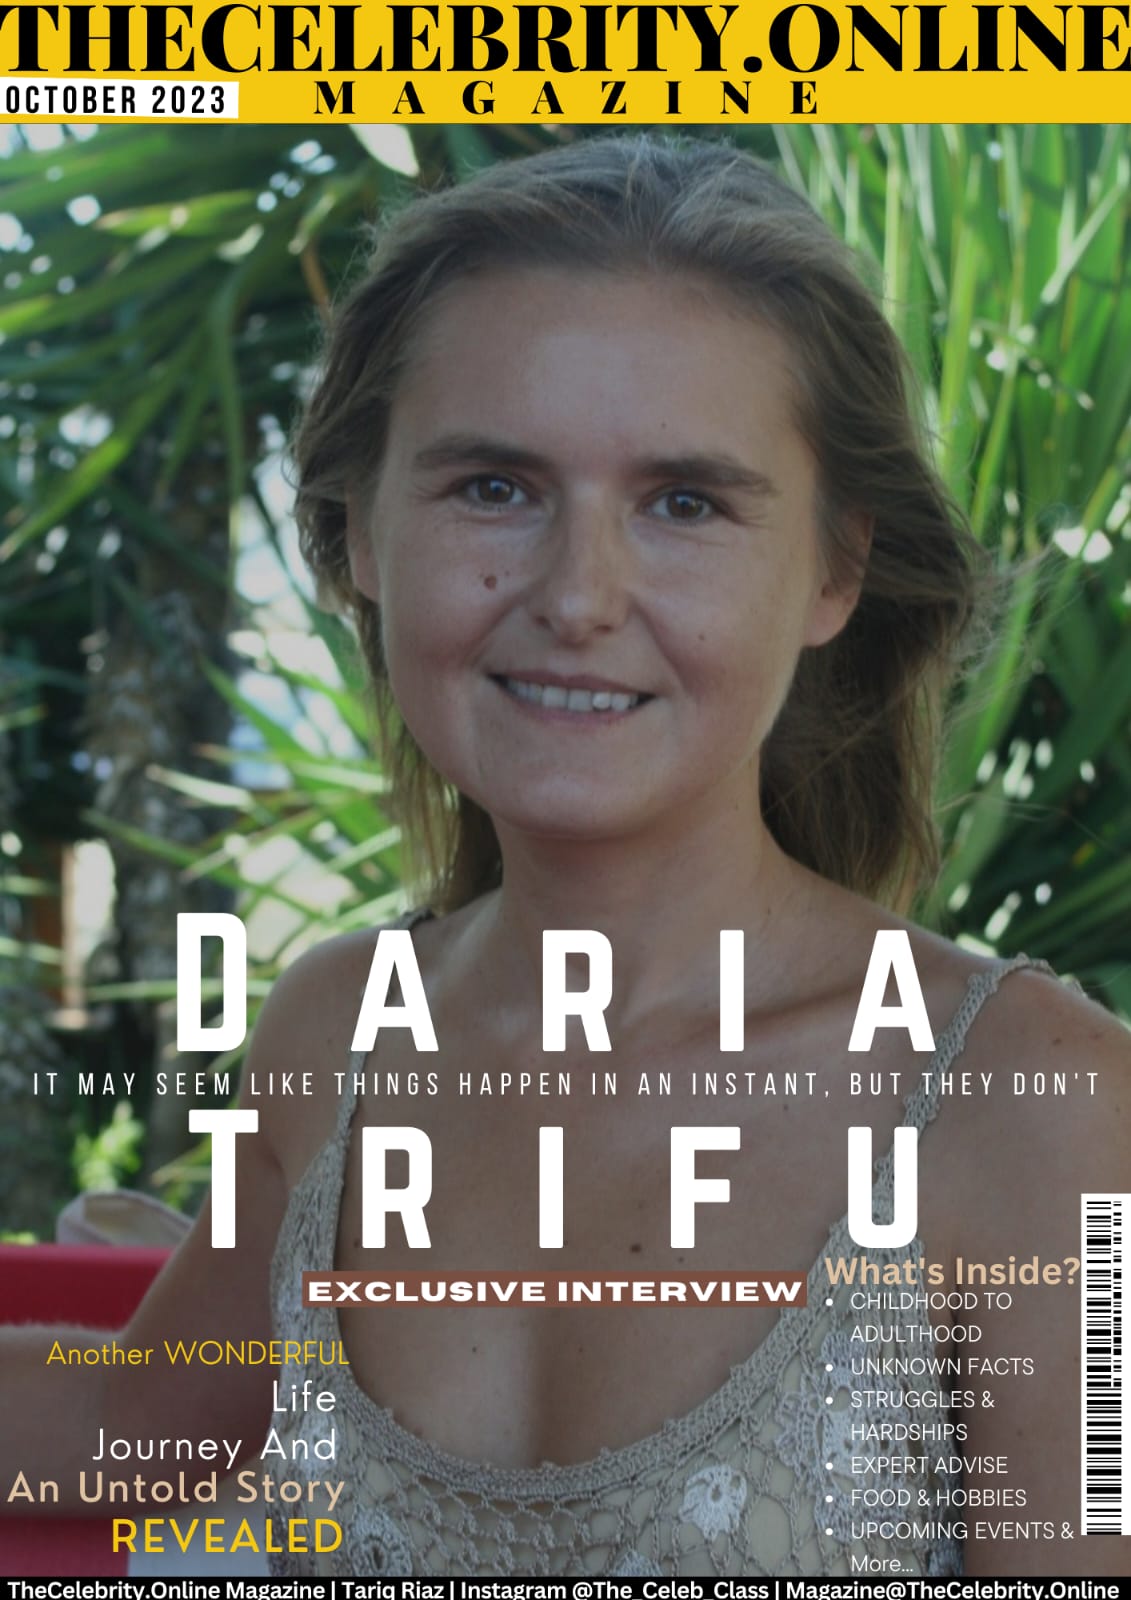 Daria Trifu Exclusive Interview – ‘It May Seem Like Things Happen In An Instant, But They Don’t’